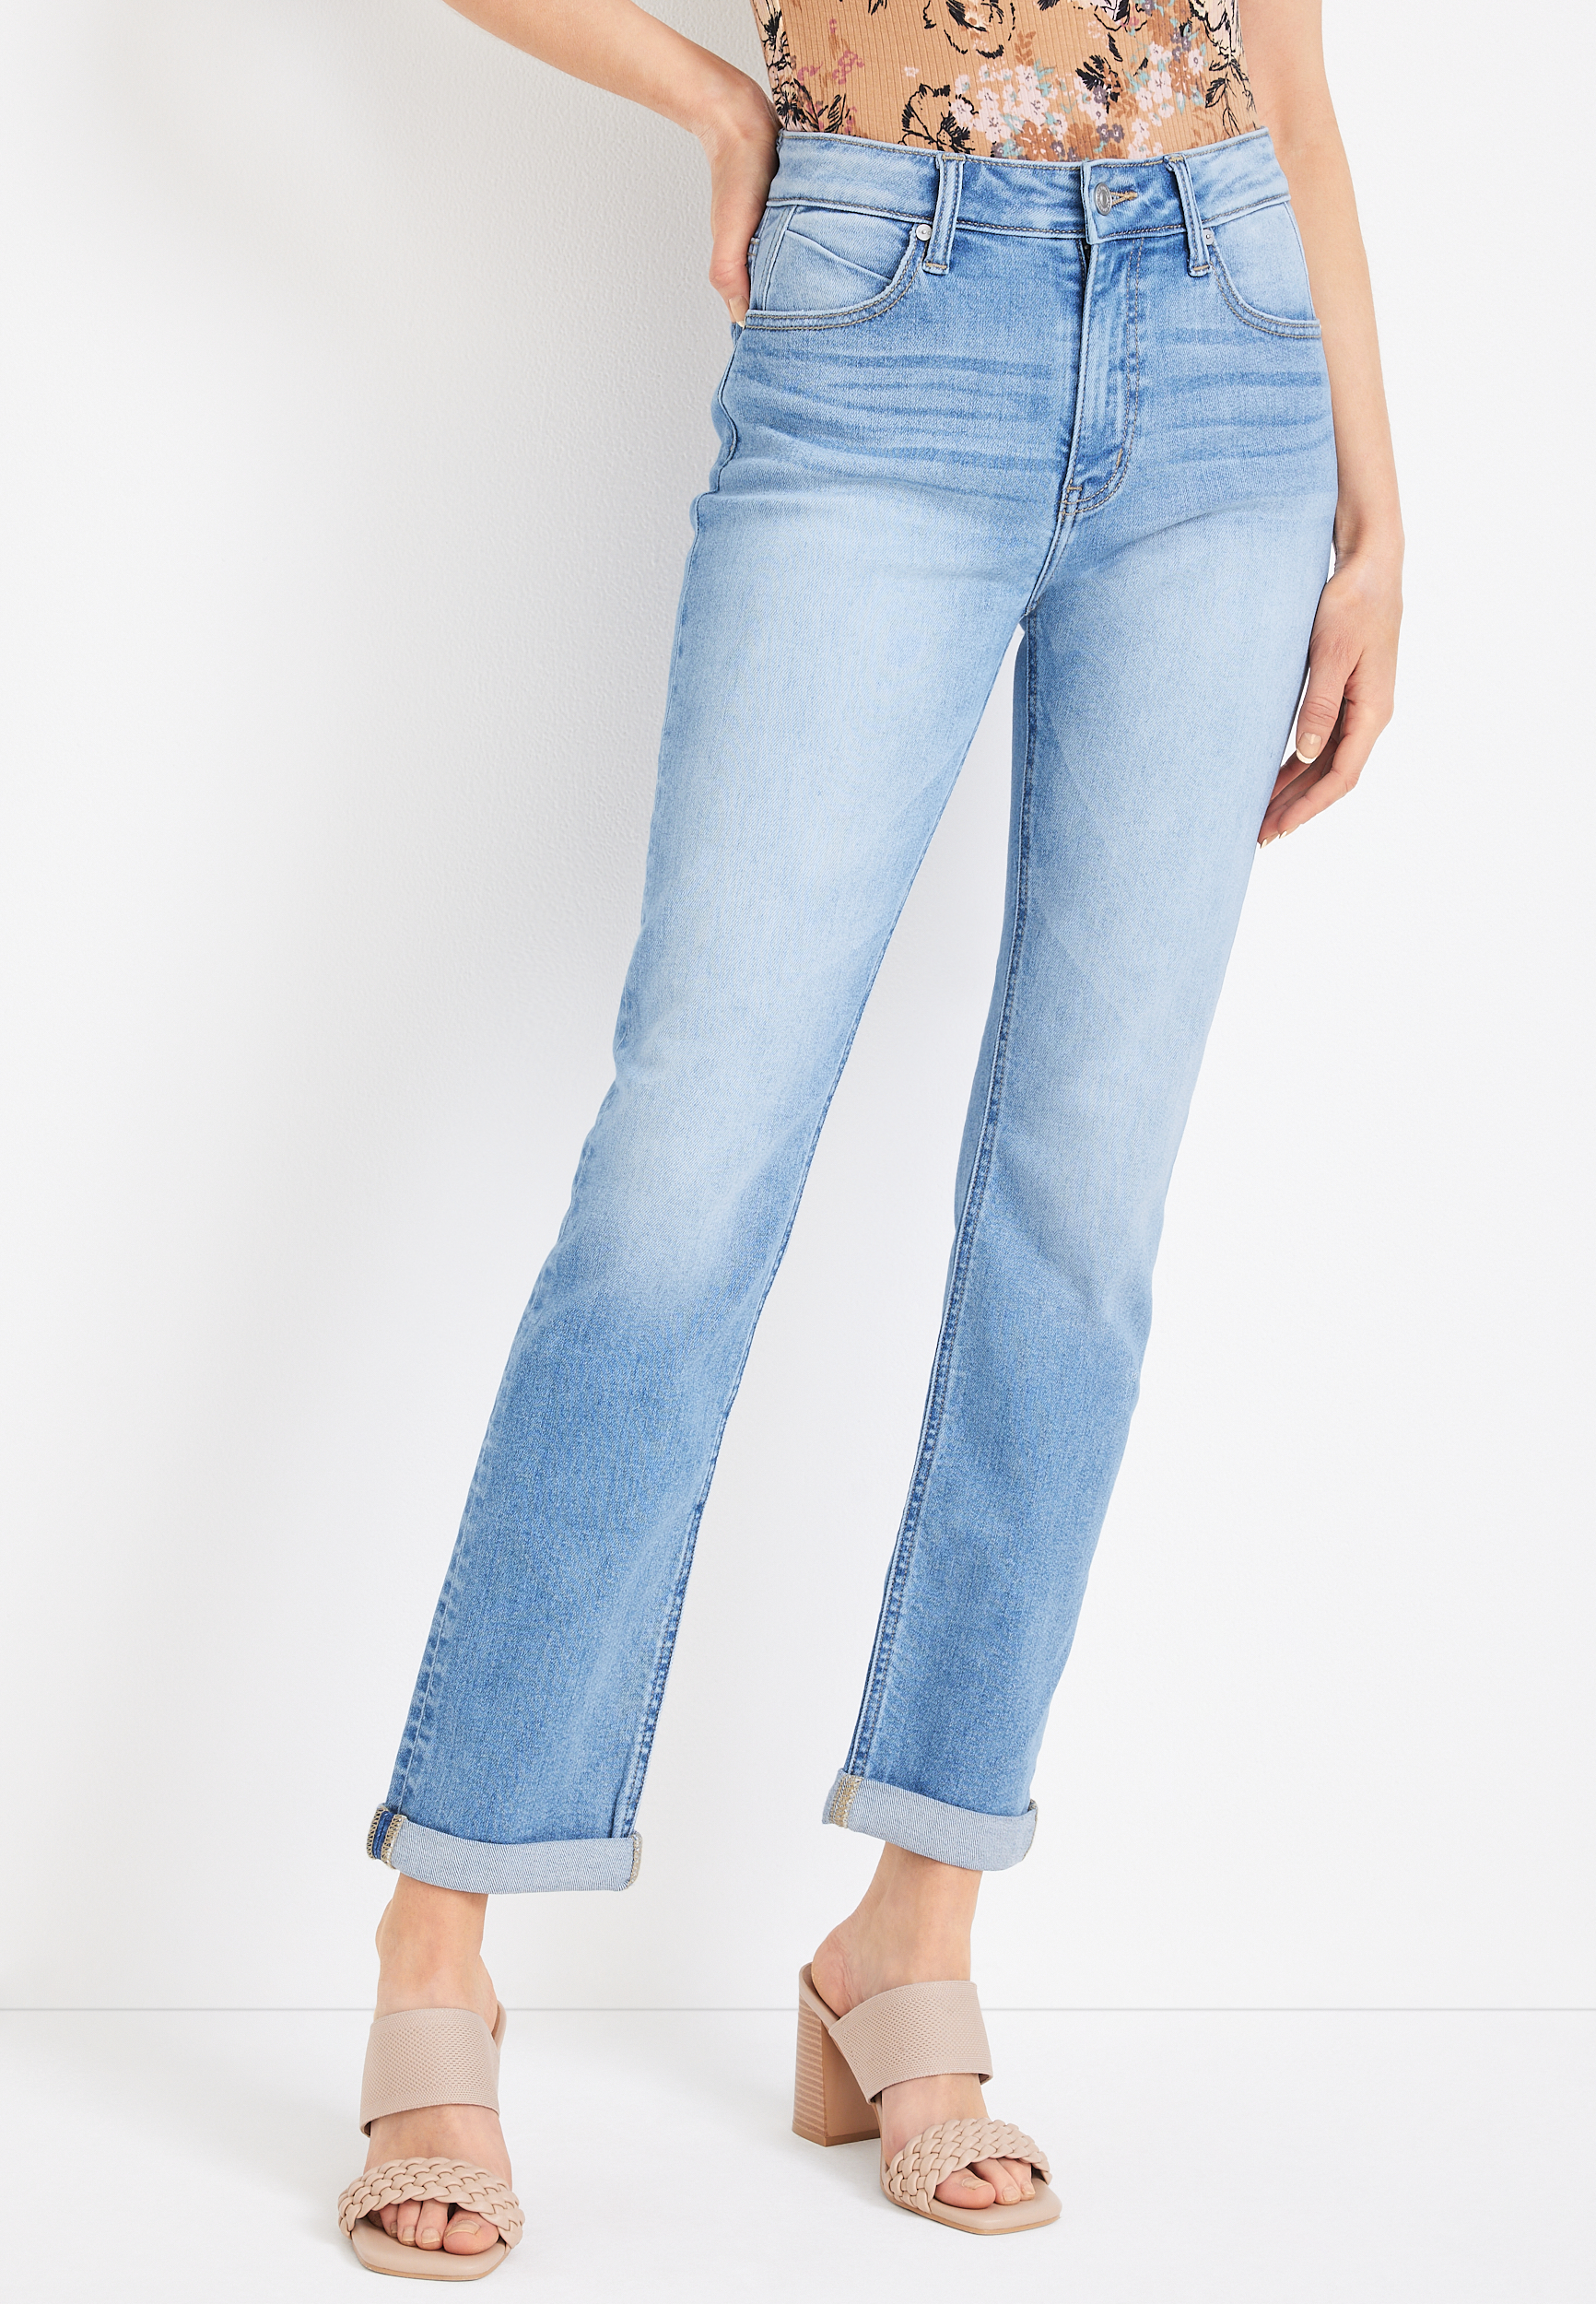 KanCan™ Ankle Slim Straight High Rise Cuffed Jean | maurices